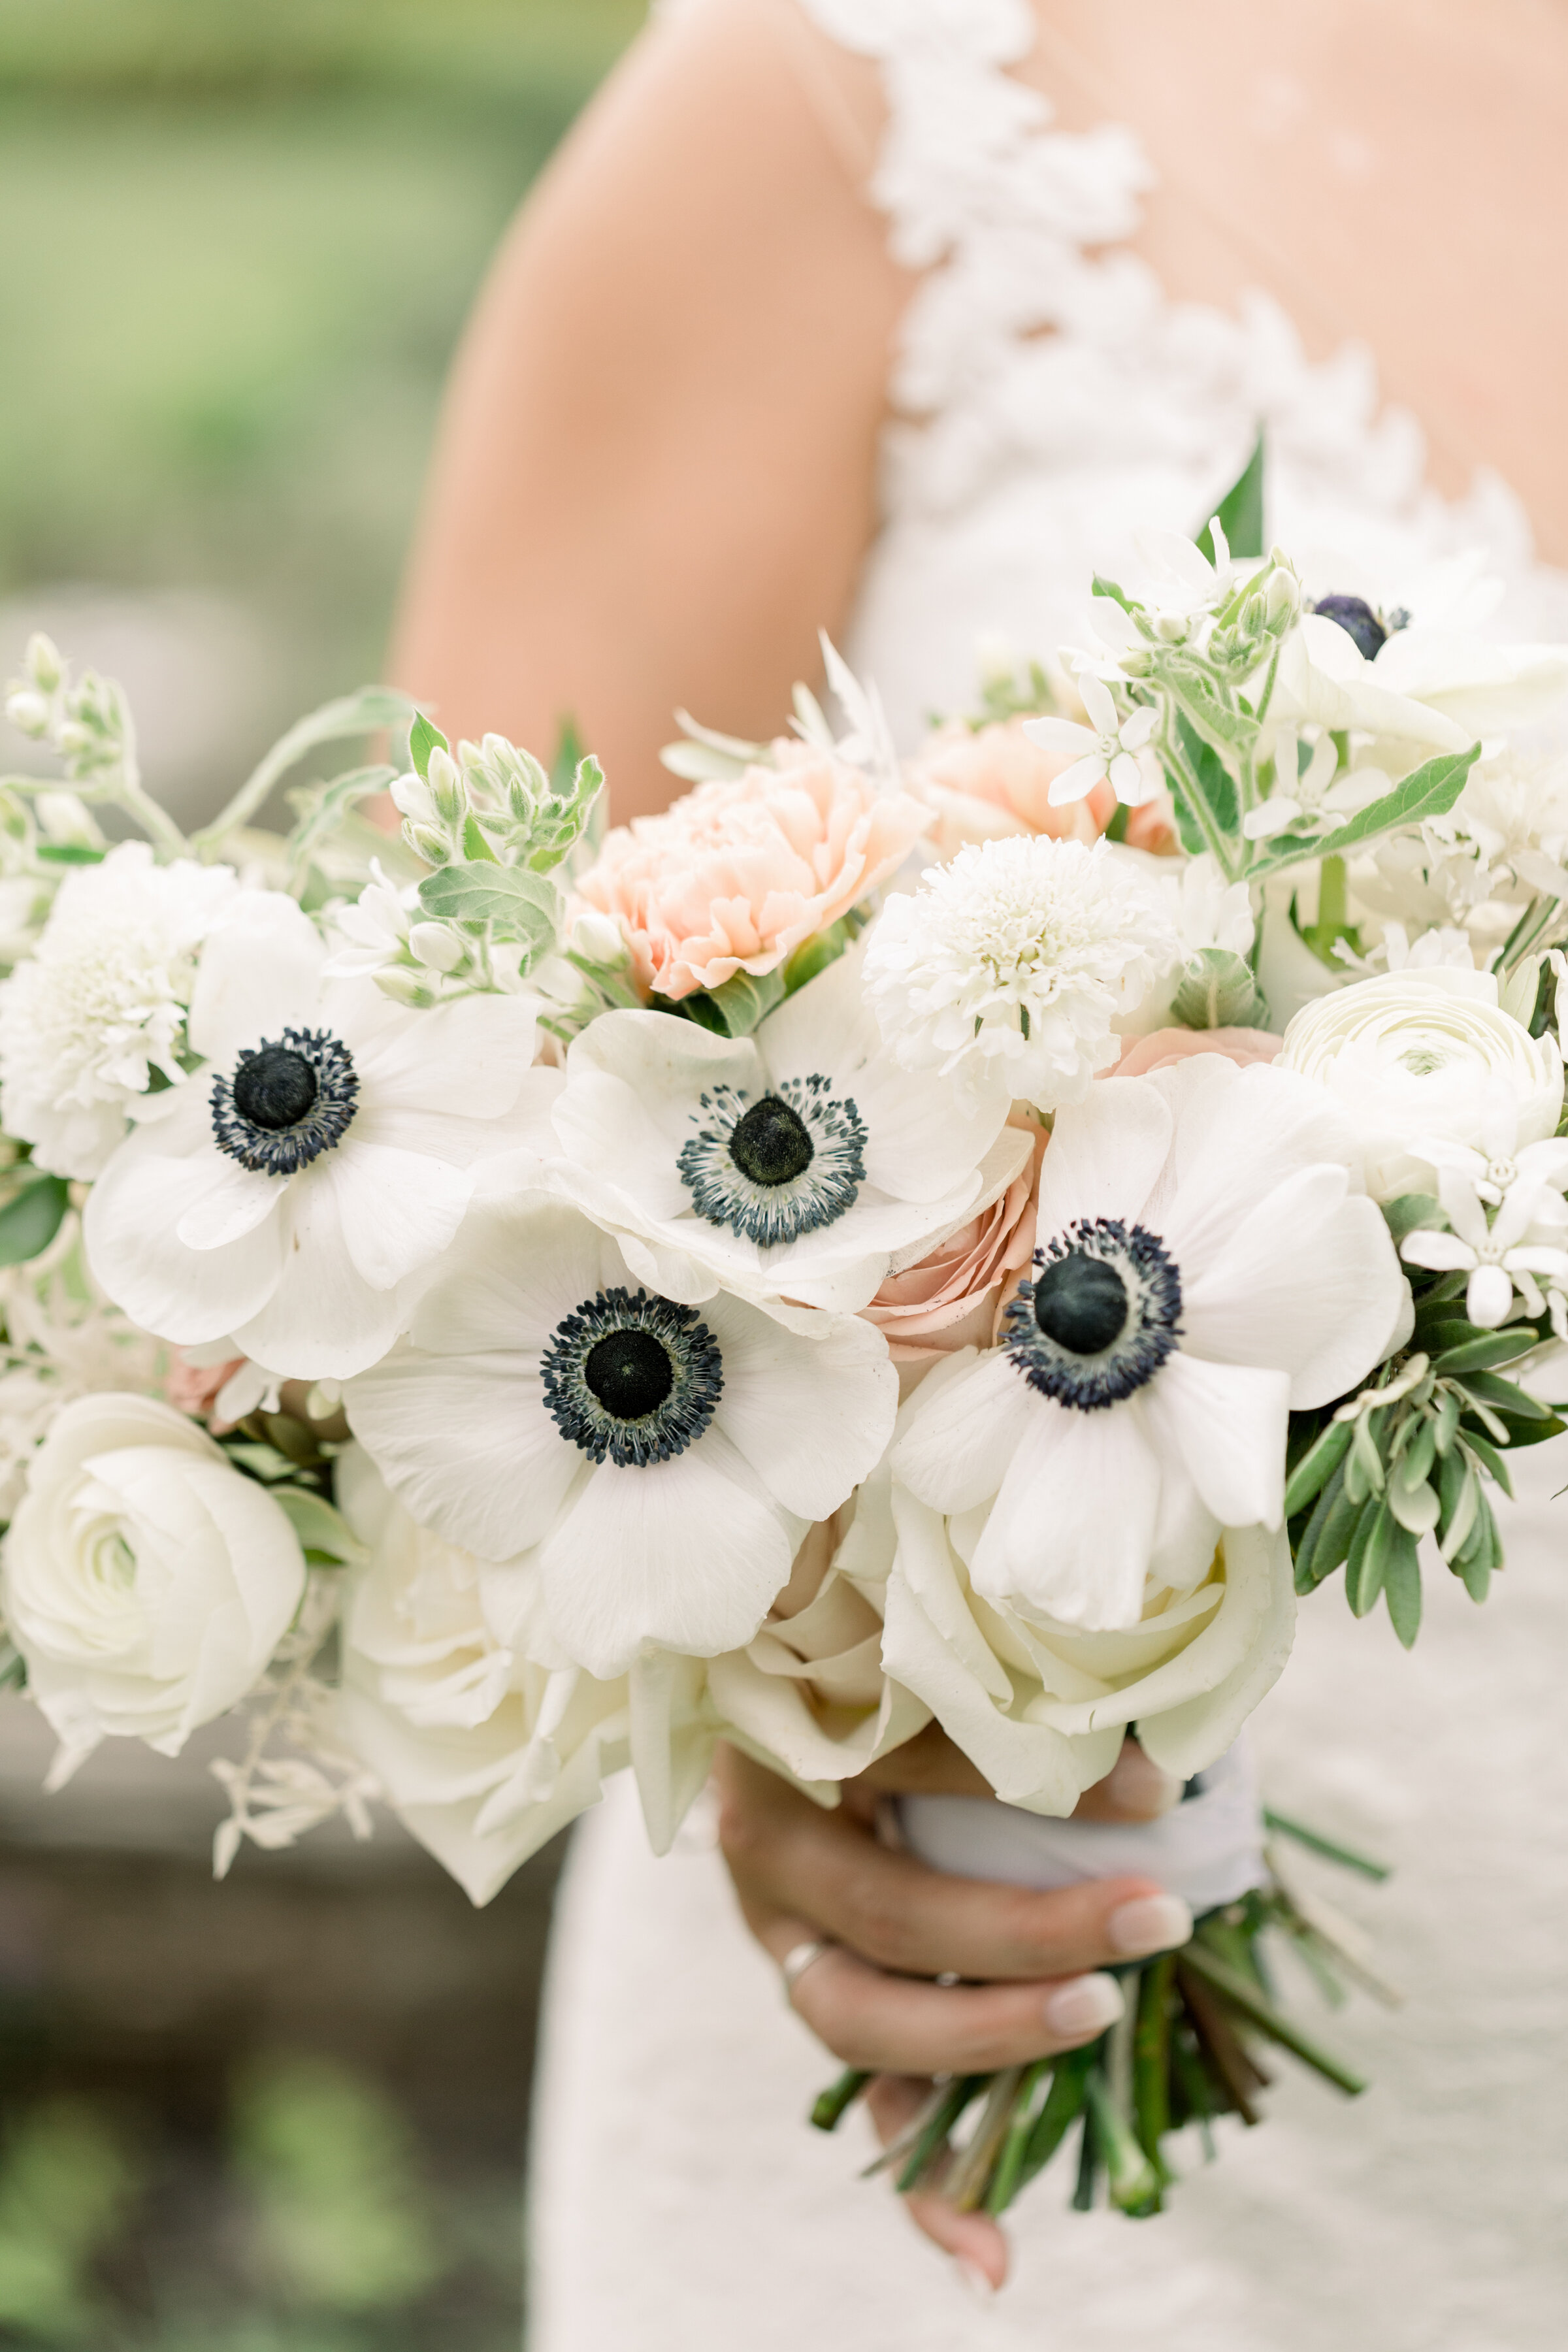  Detail shot of bridal bouquet with white and black and blush flowers by Chelsea Mason Photography in Ottawa, ON. best wedding photographer ottawa white black blue blush wedding colors unique bridal bouquets how to arrange a bridal bouquet wedding fl